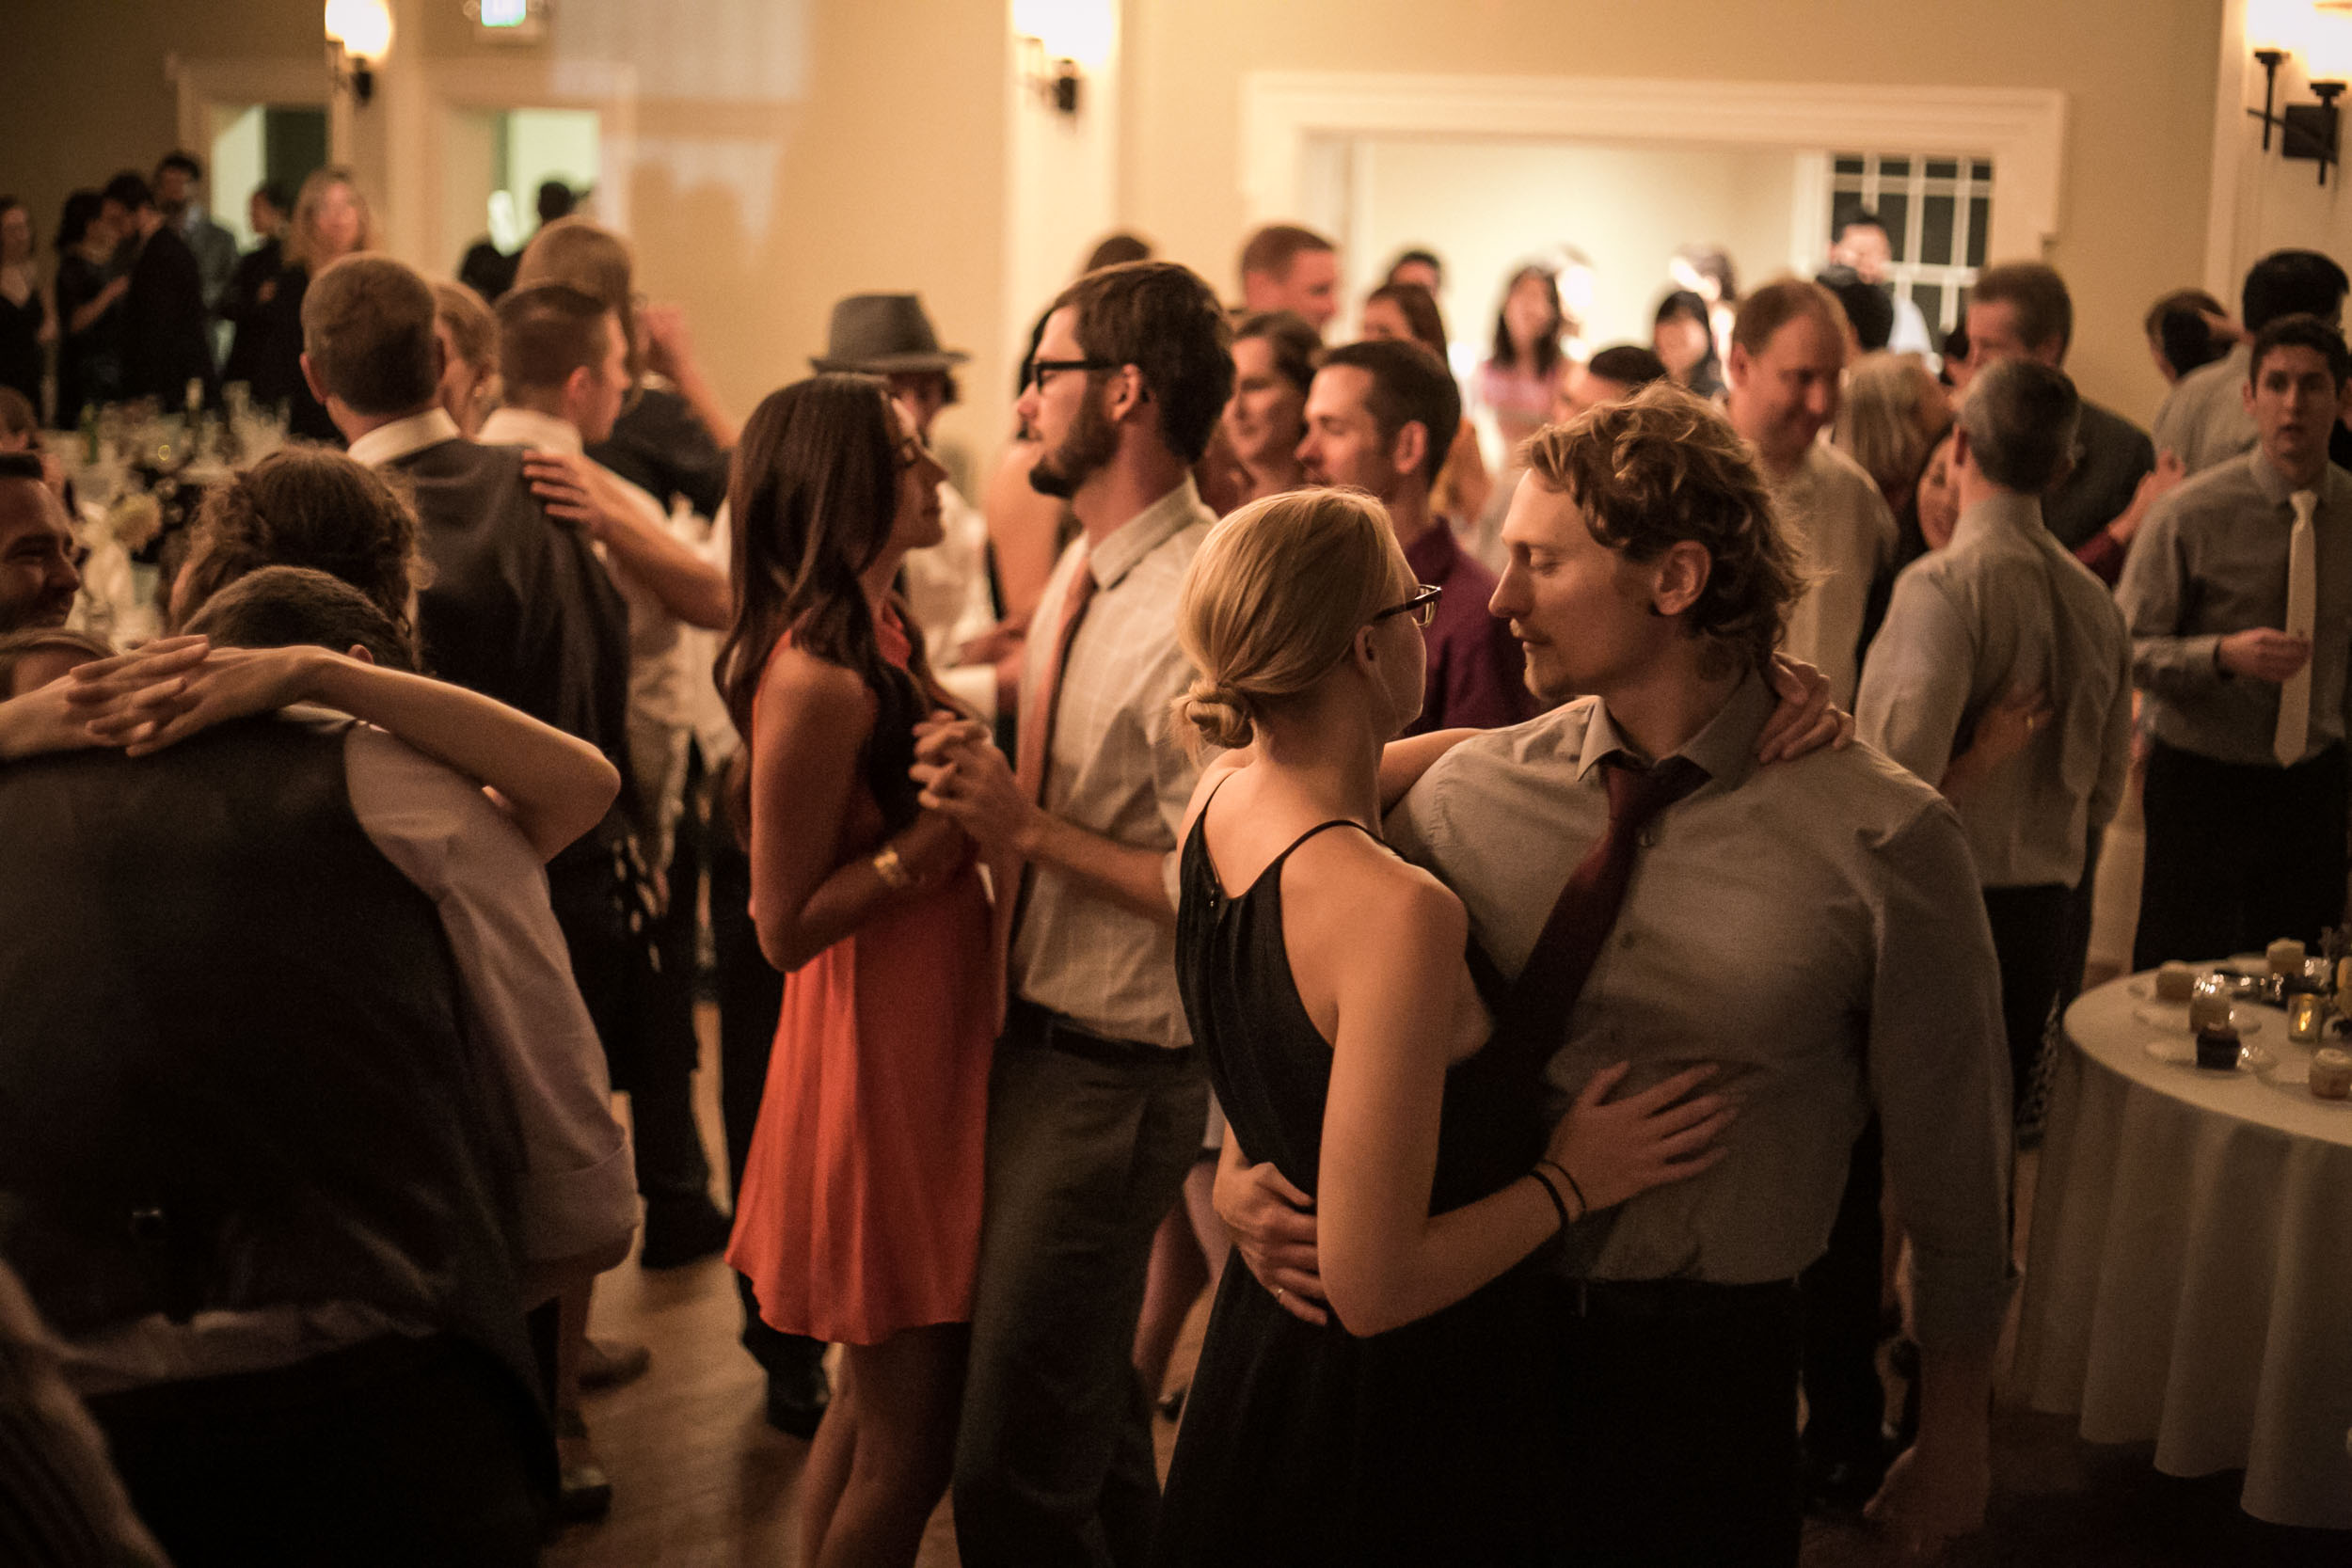 Romantic dancing for guests | The Hall at Greenlake Wedding Reception Photo | By G. Lin Photography